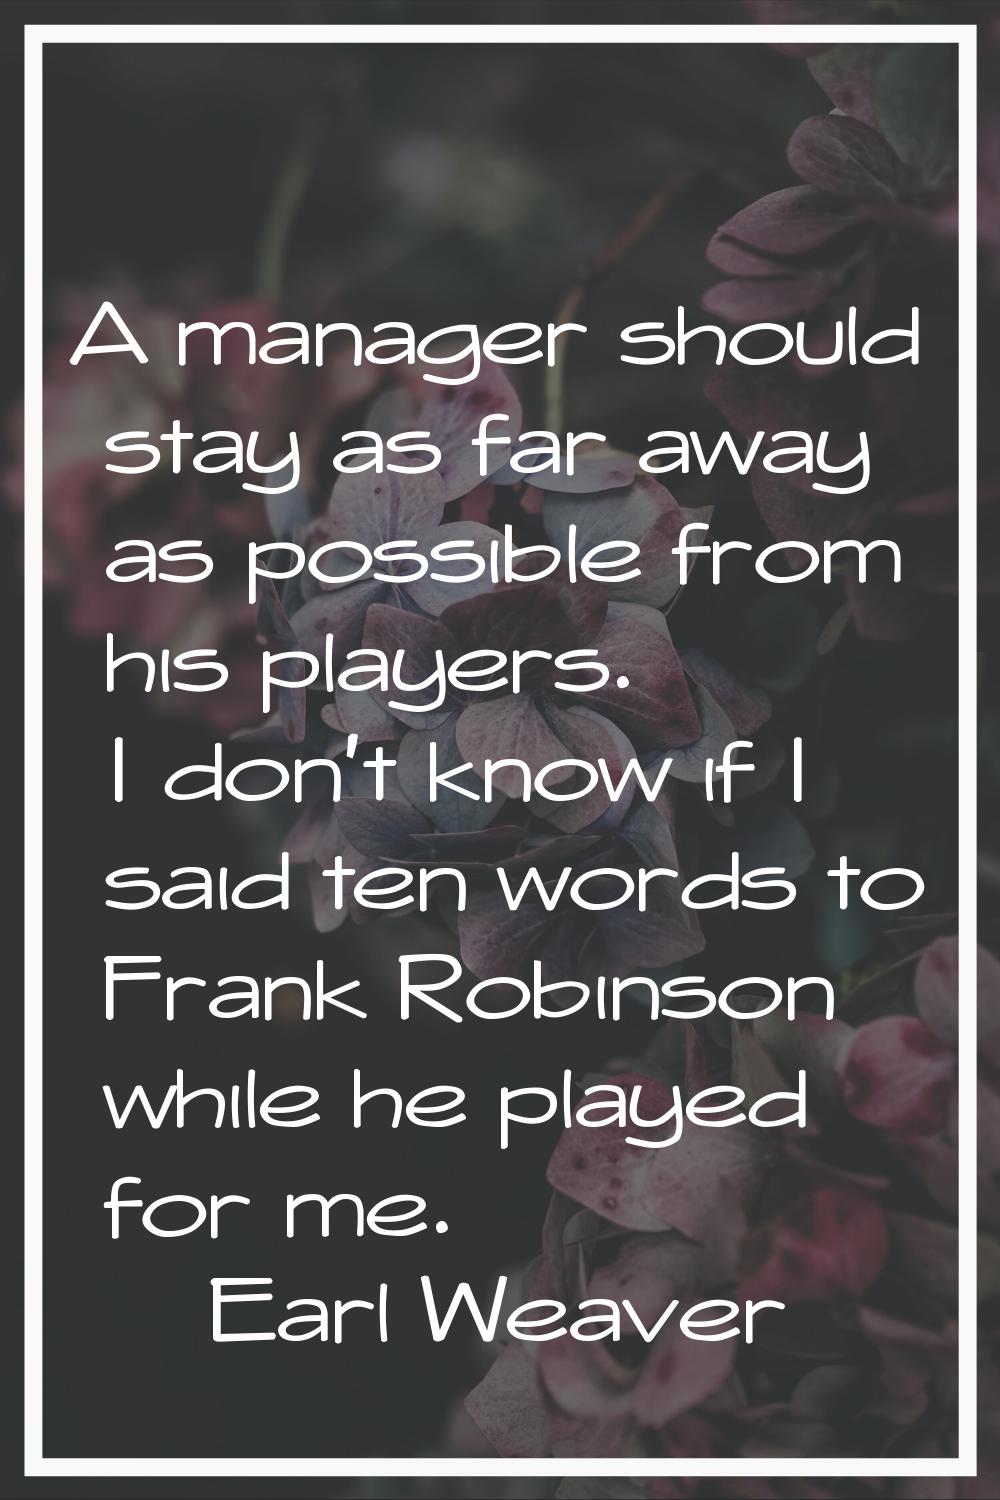 A manager should stay as far away as possible from his players. I don't know if I said ten words to